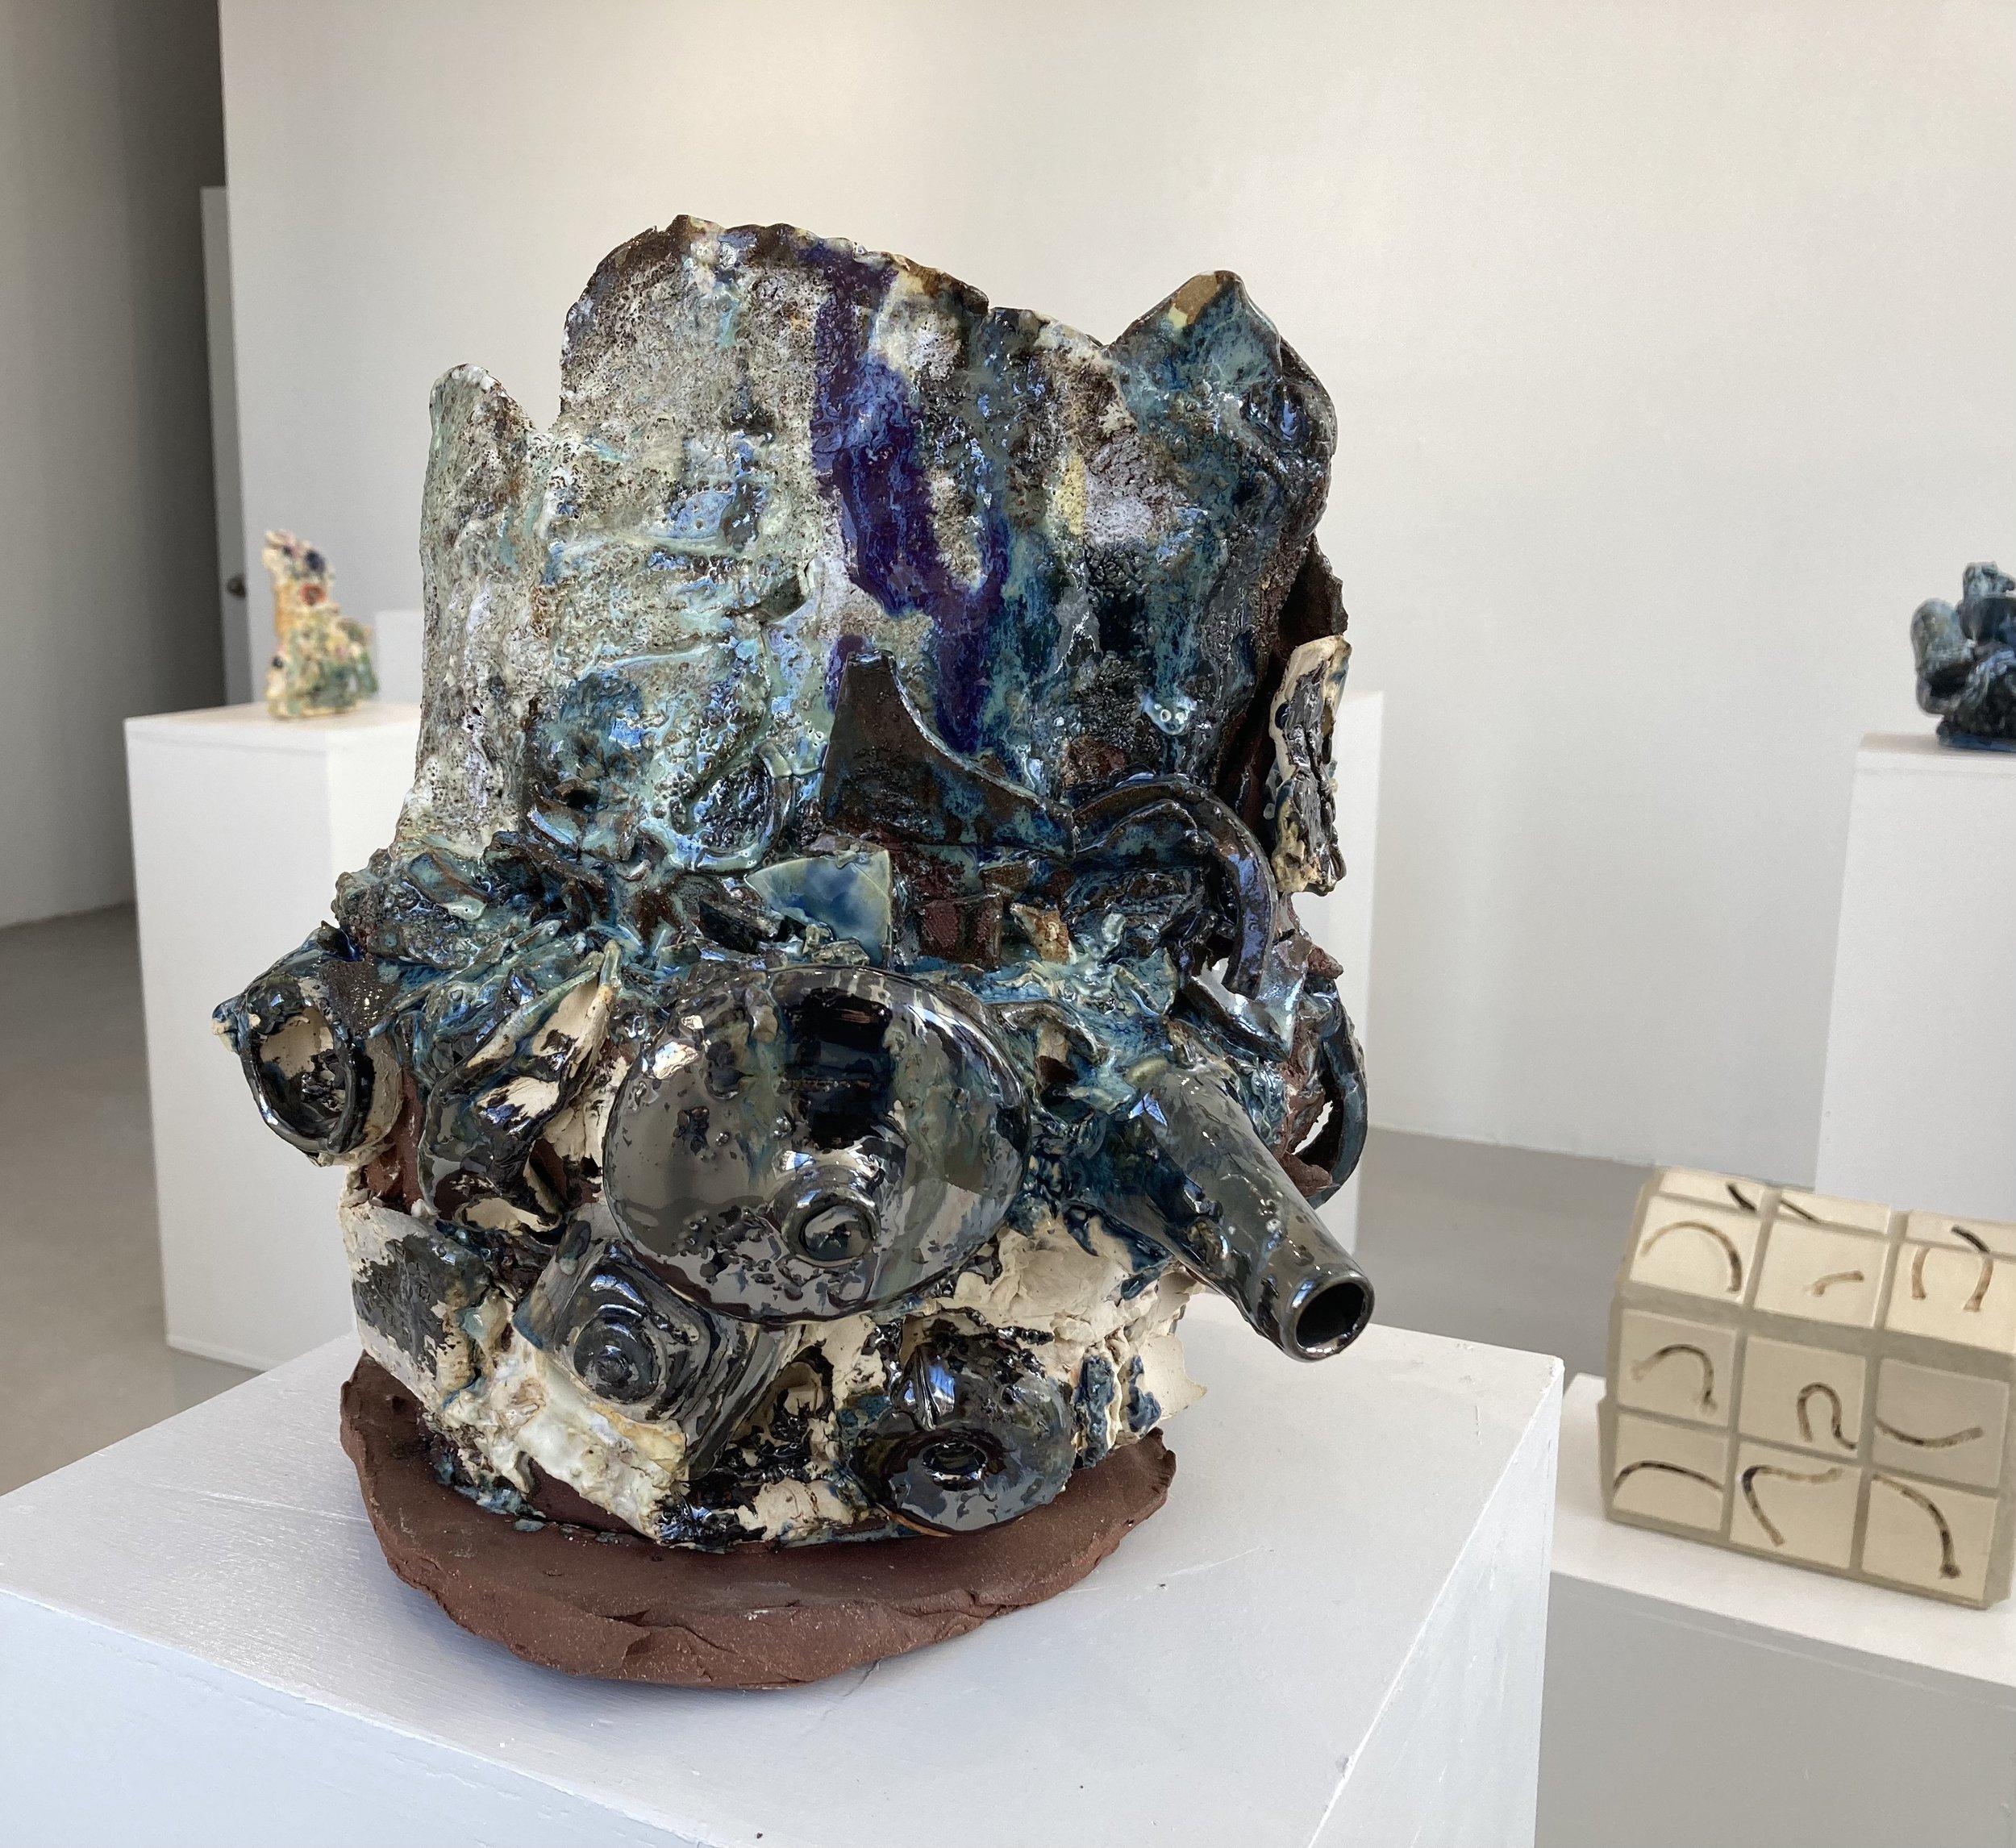  Vessel With Other Vessels And Debris, Glazed Ceramic, 13” X 13” X 11”, 2021 